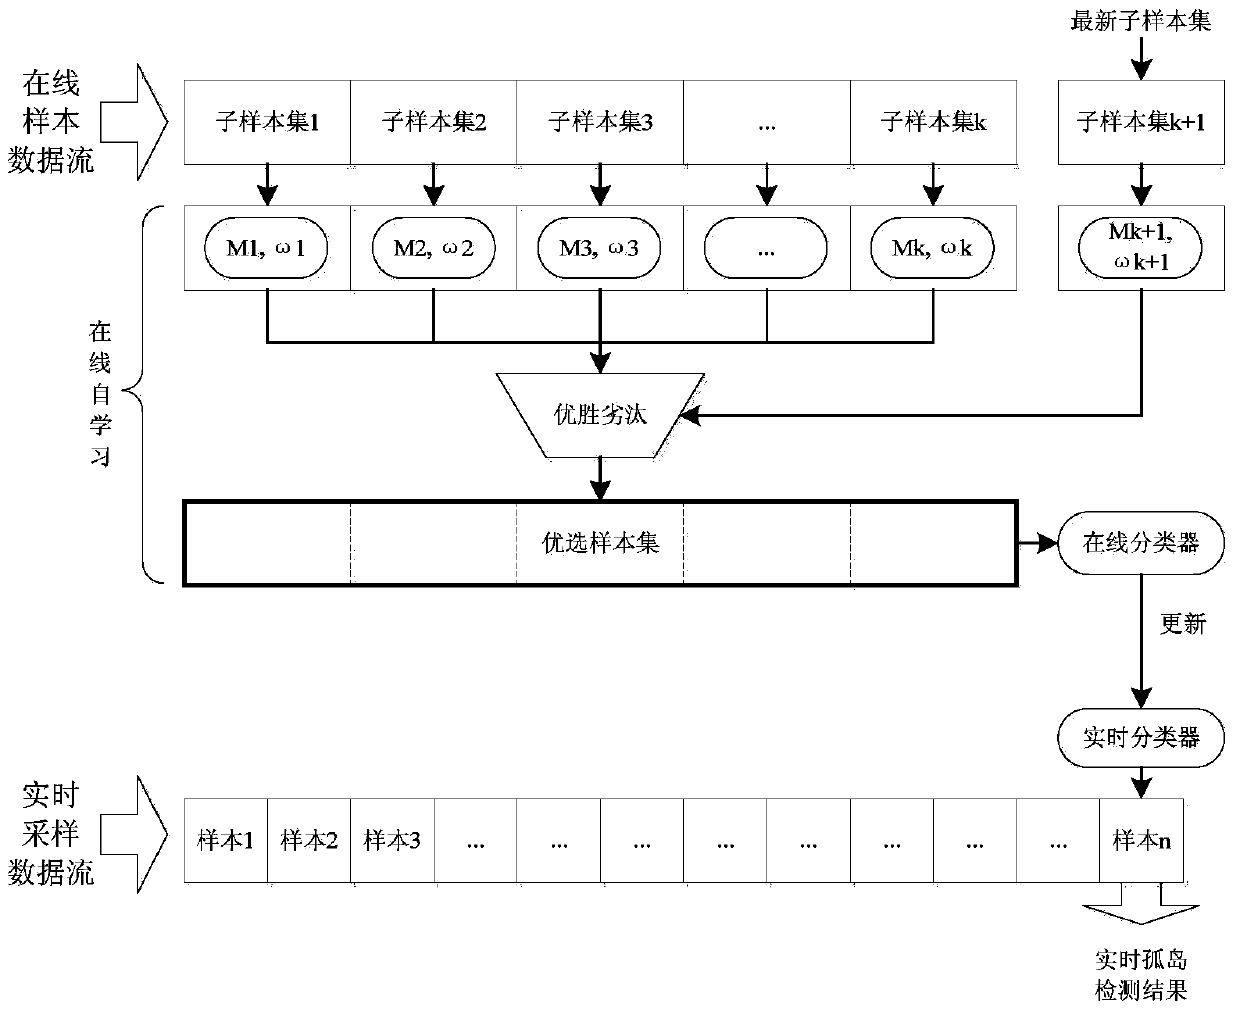 Distributed generation island detection method with on-line self-learning ability